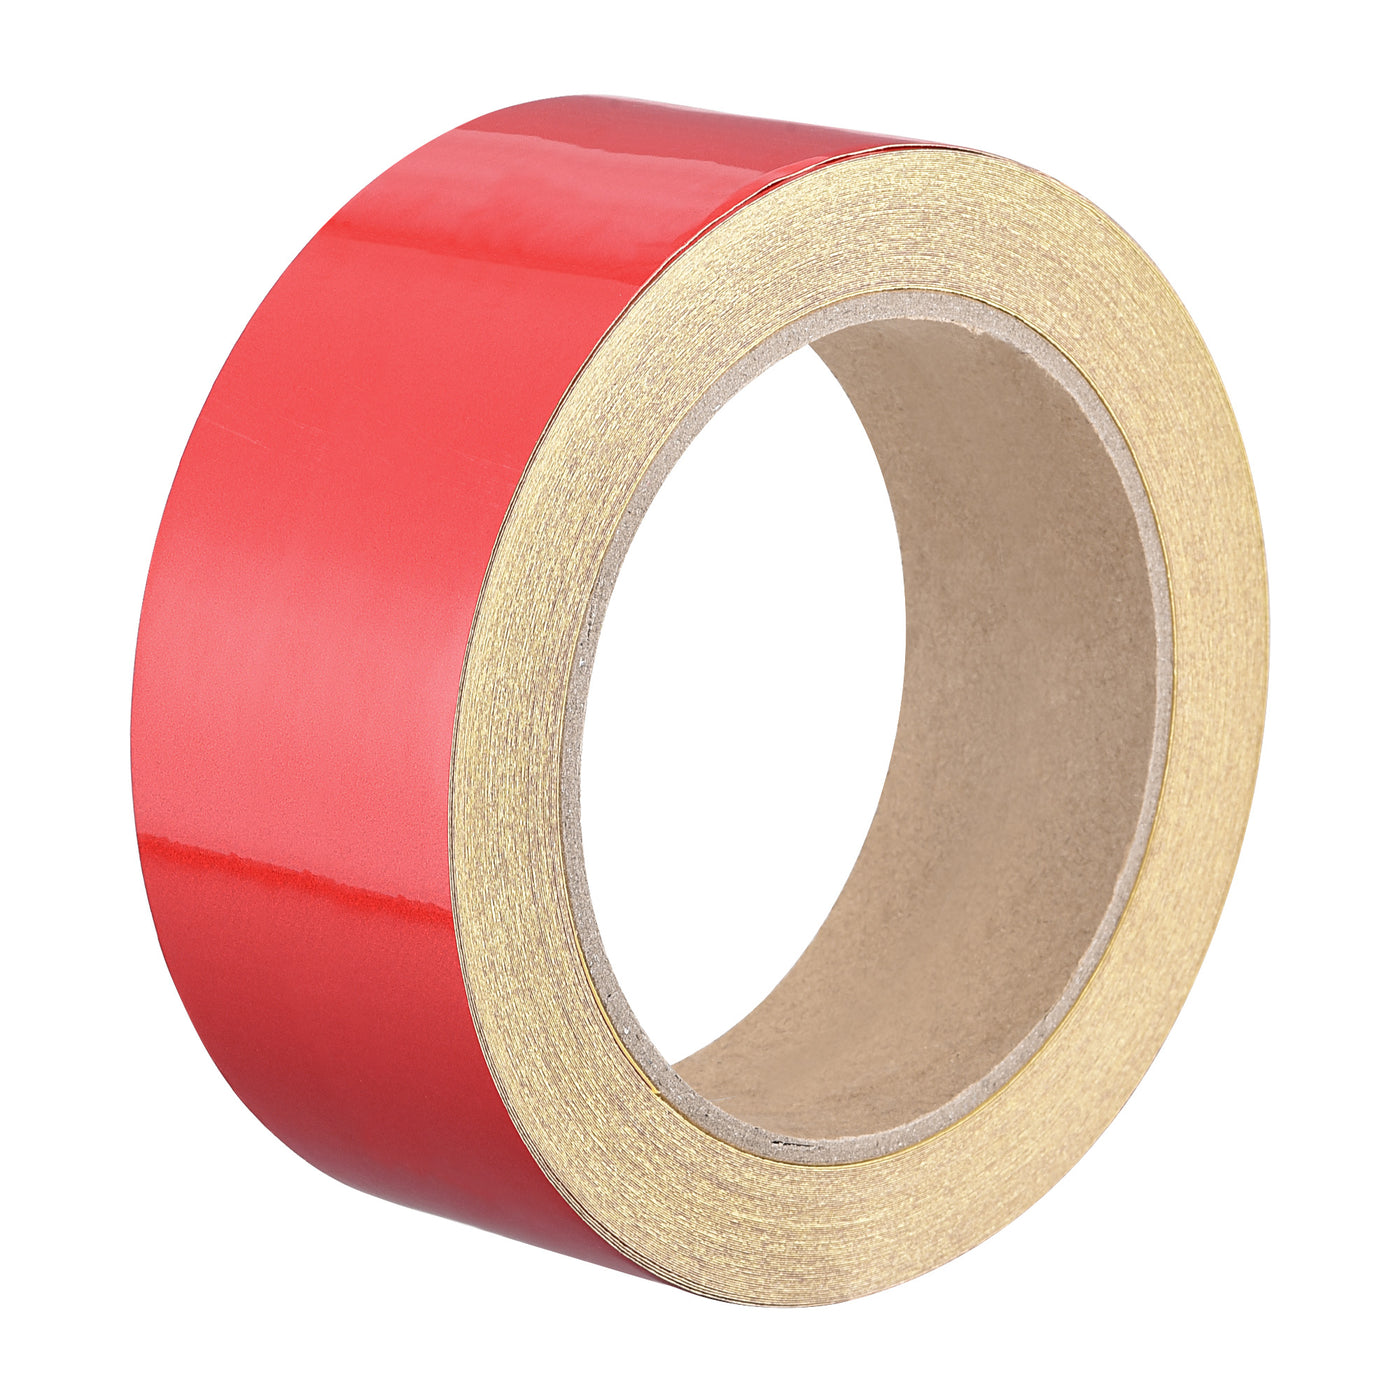 uxcell Uxcell Reflective Tape Red, 50mm x 25m, Outdoor Waterproof Warning Tape For Bikes, RV, and Boat Striping Marking